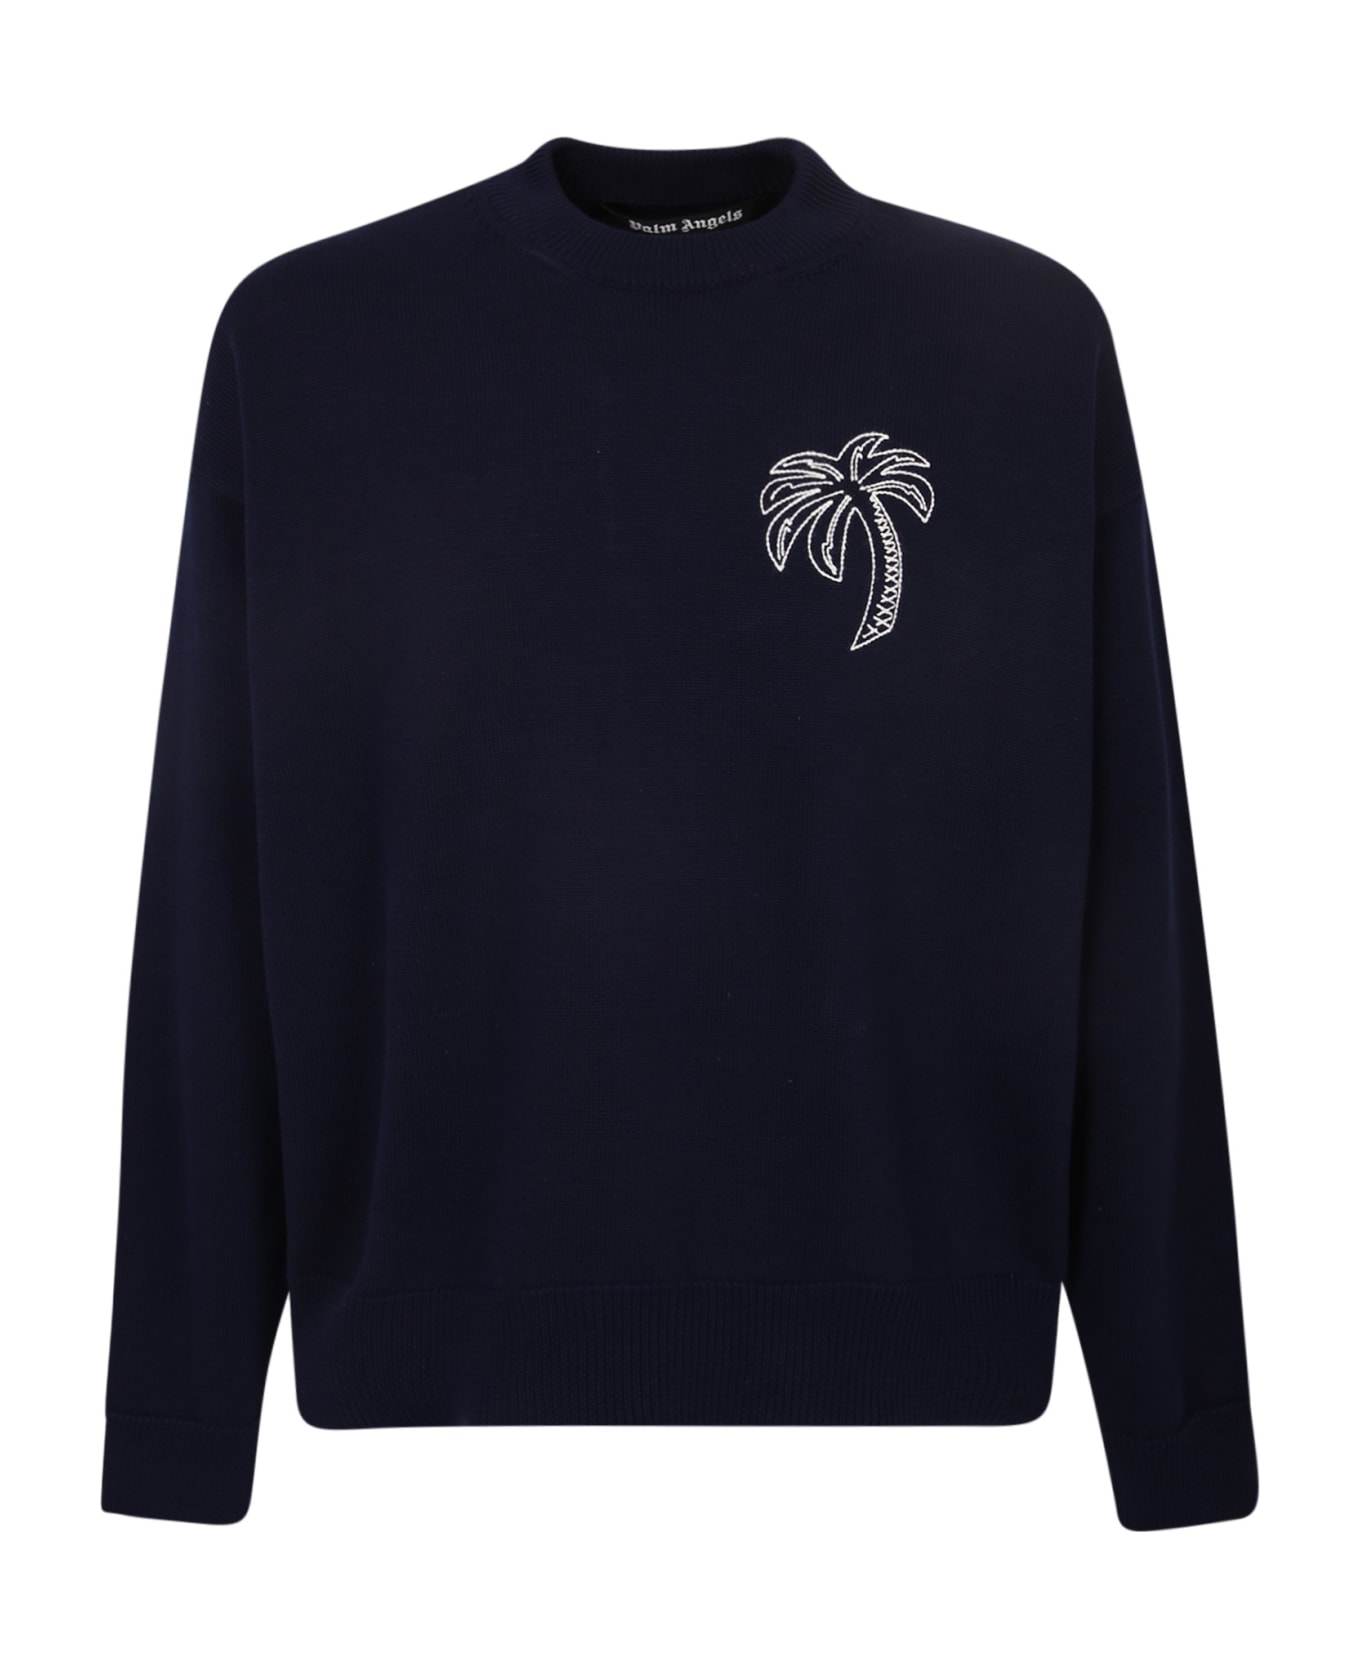 Palm Angels Embroidered Palm Sweater - Black フリース